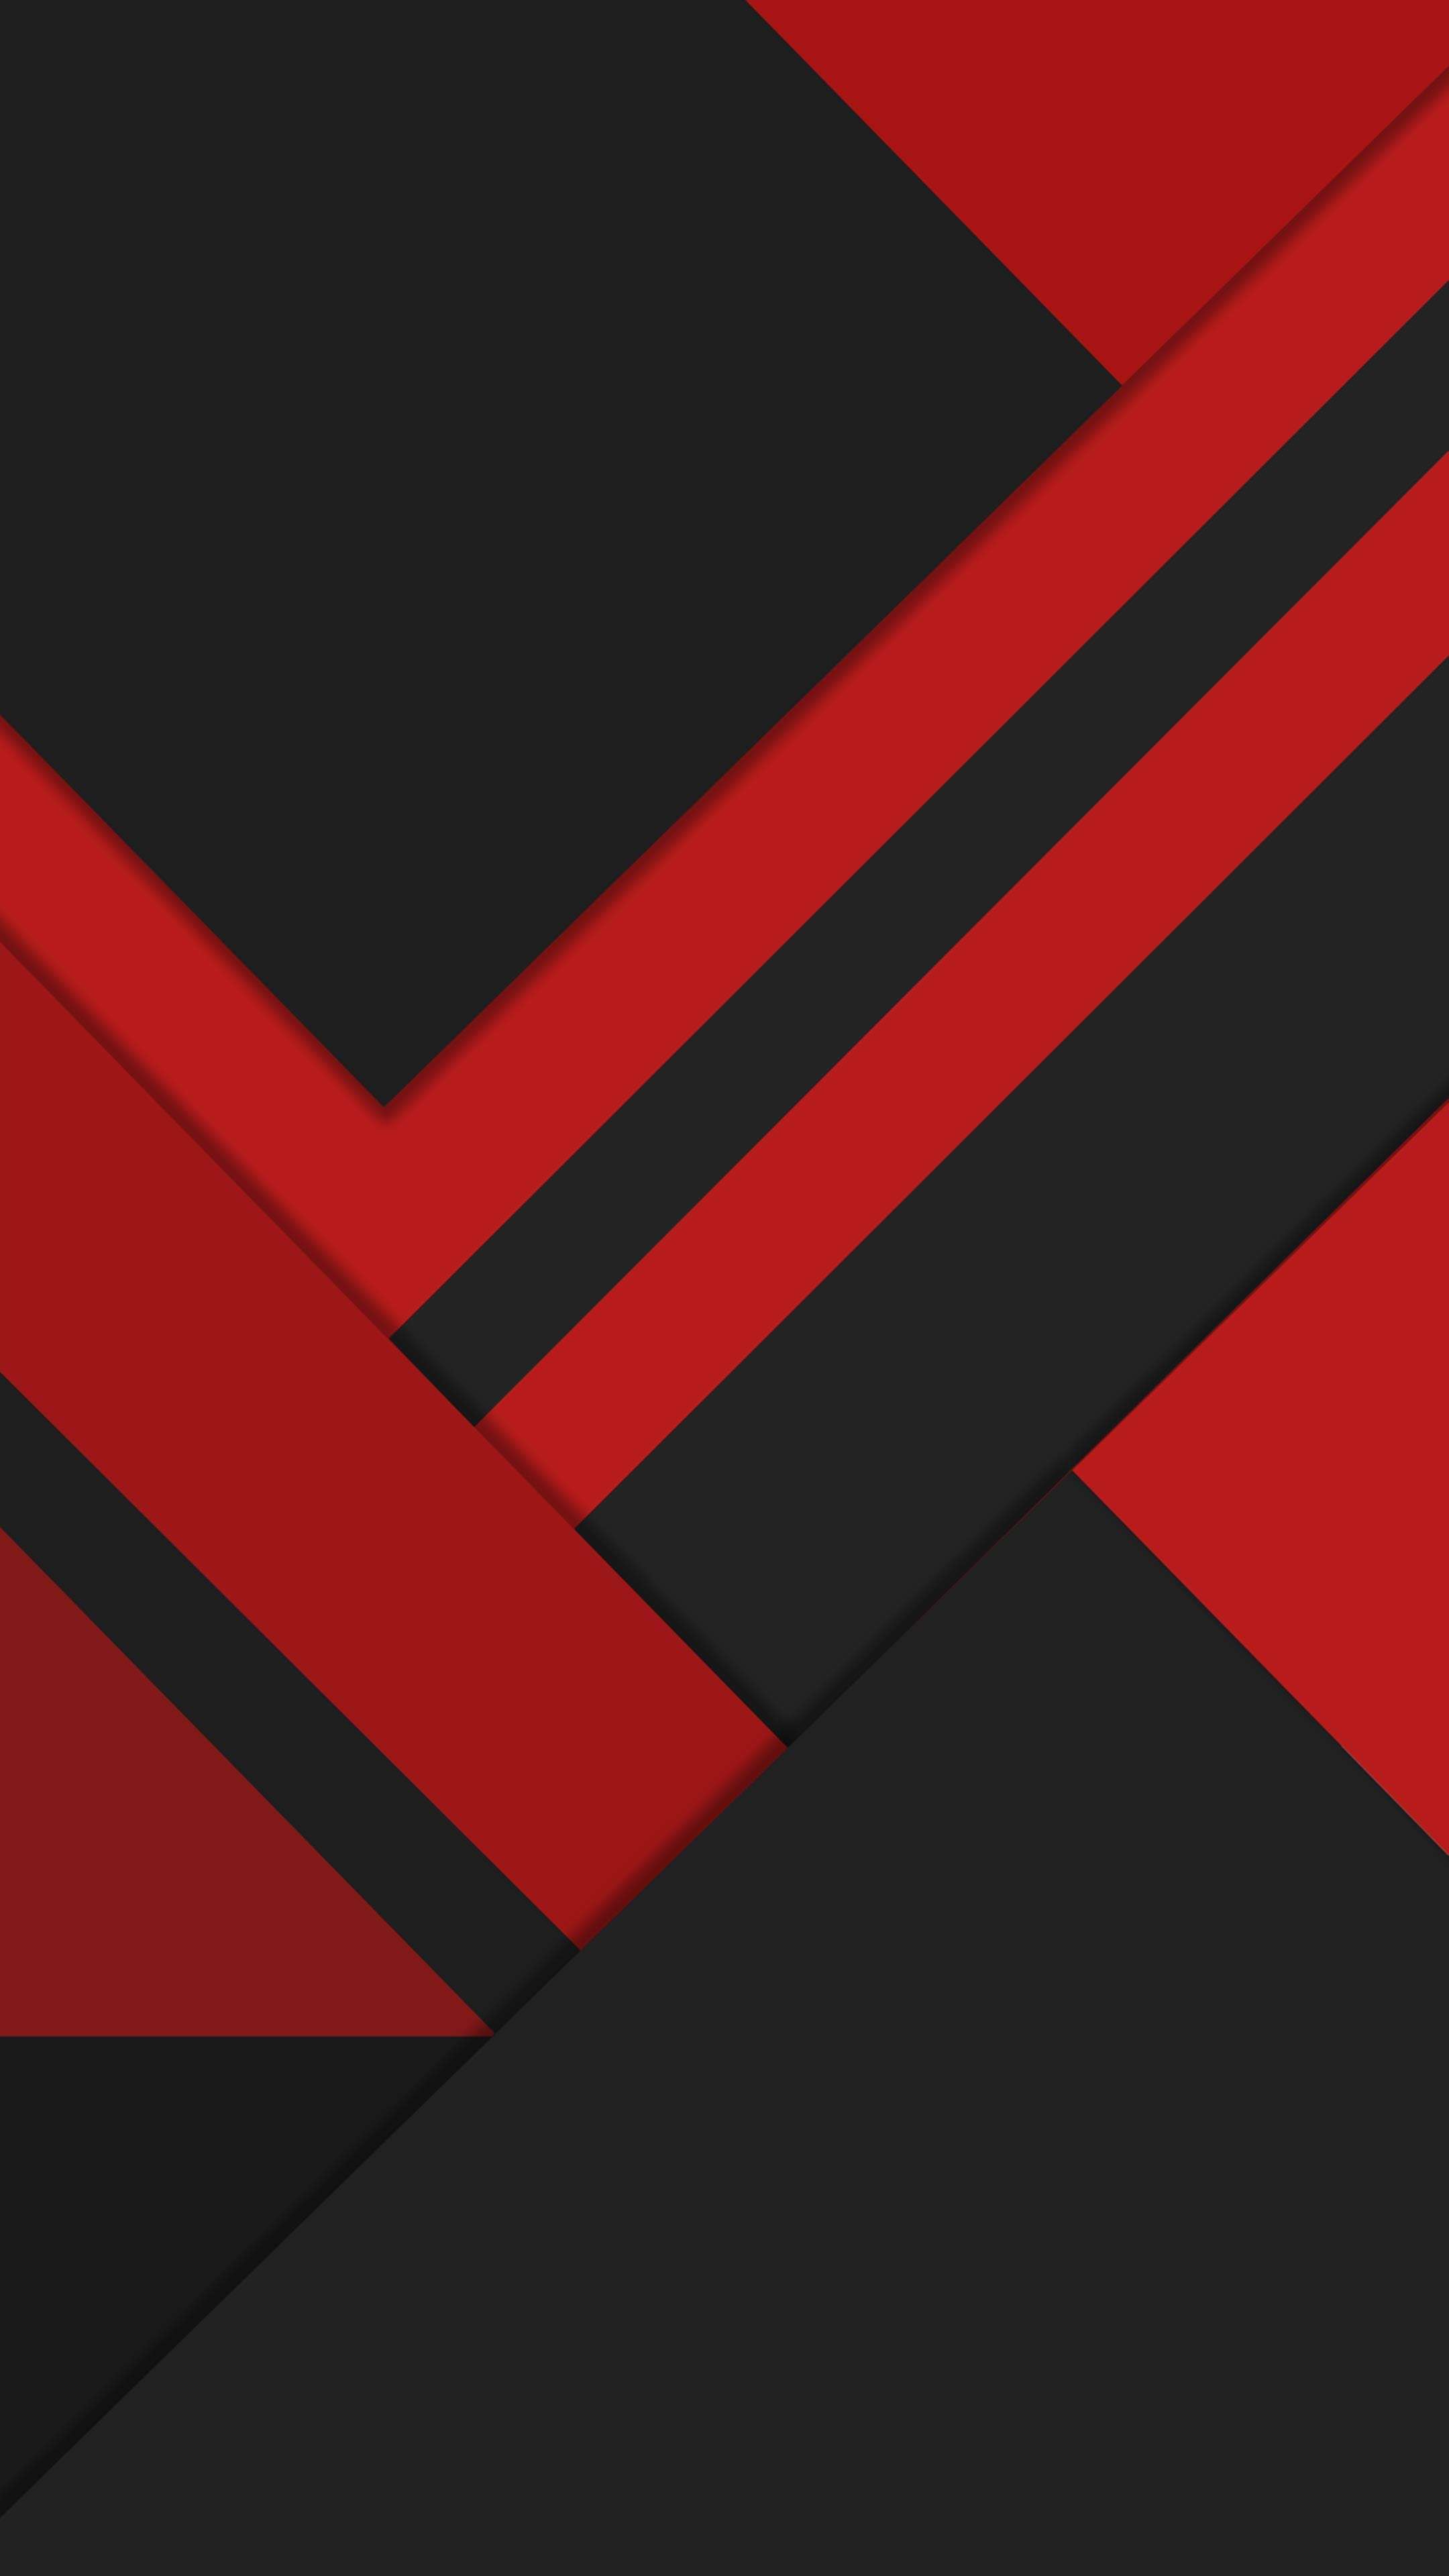 Black & Red Abstract Shapes 4K Phone Wallpaper